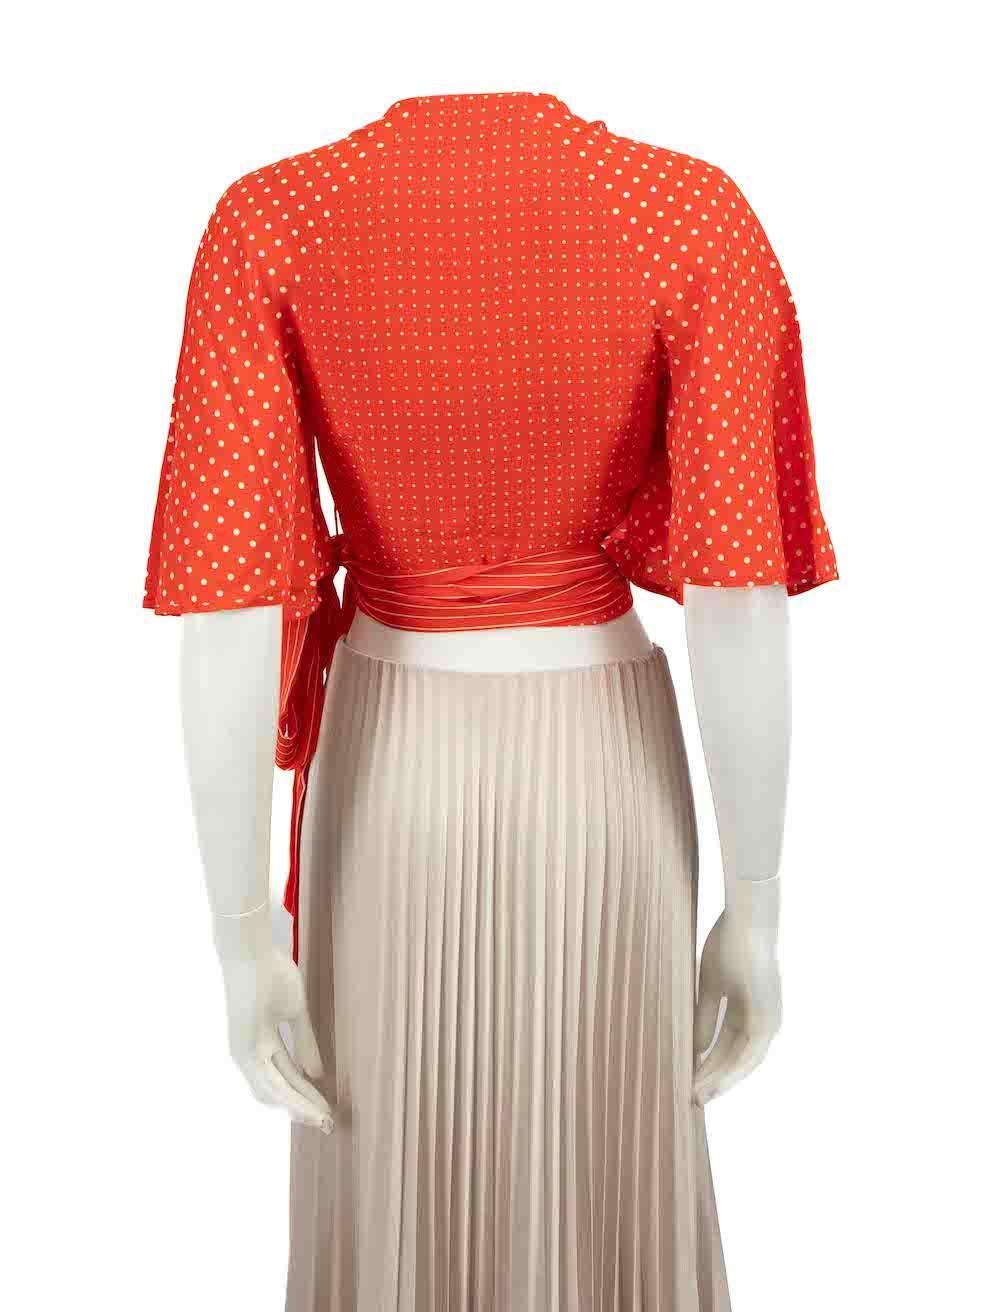 Zimmermann Red Polkadot Wrap Around Top Size M In Good Condition For Sale In London, GB